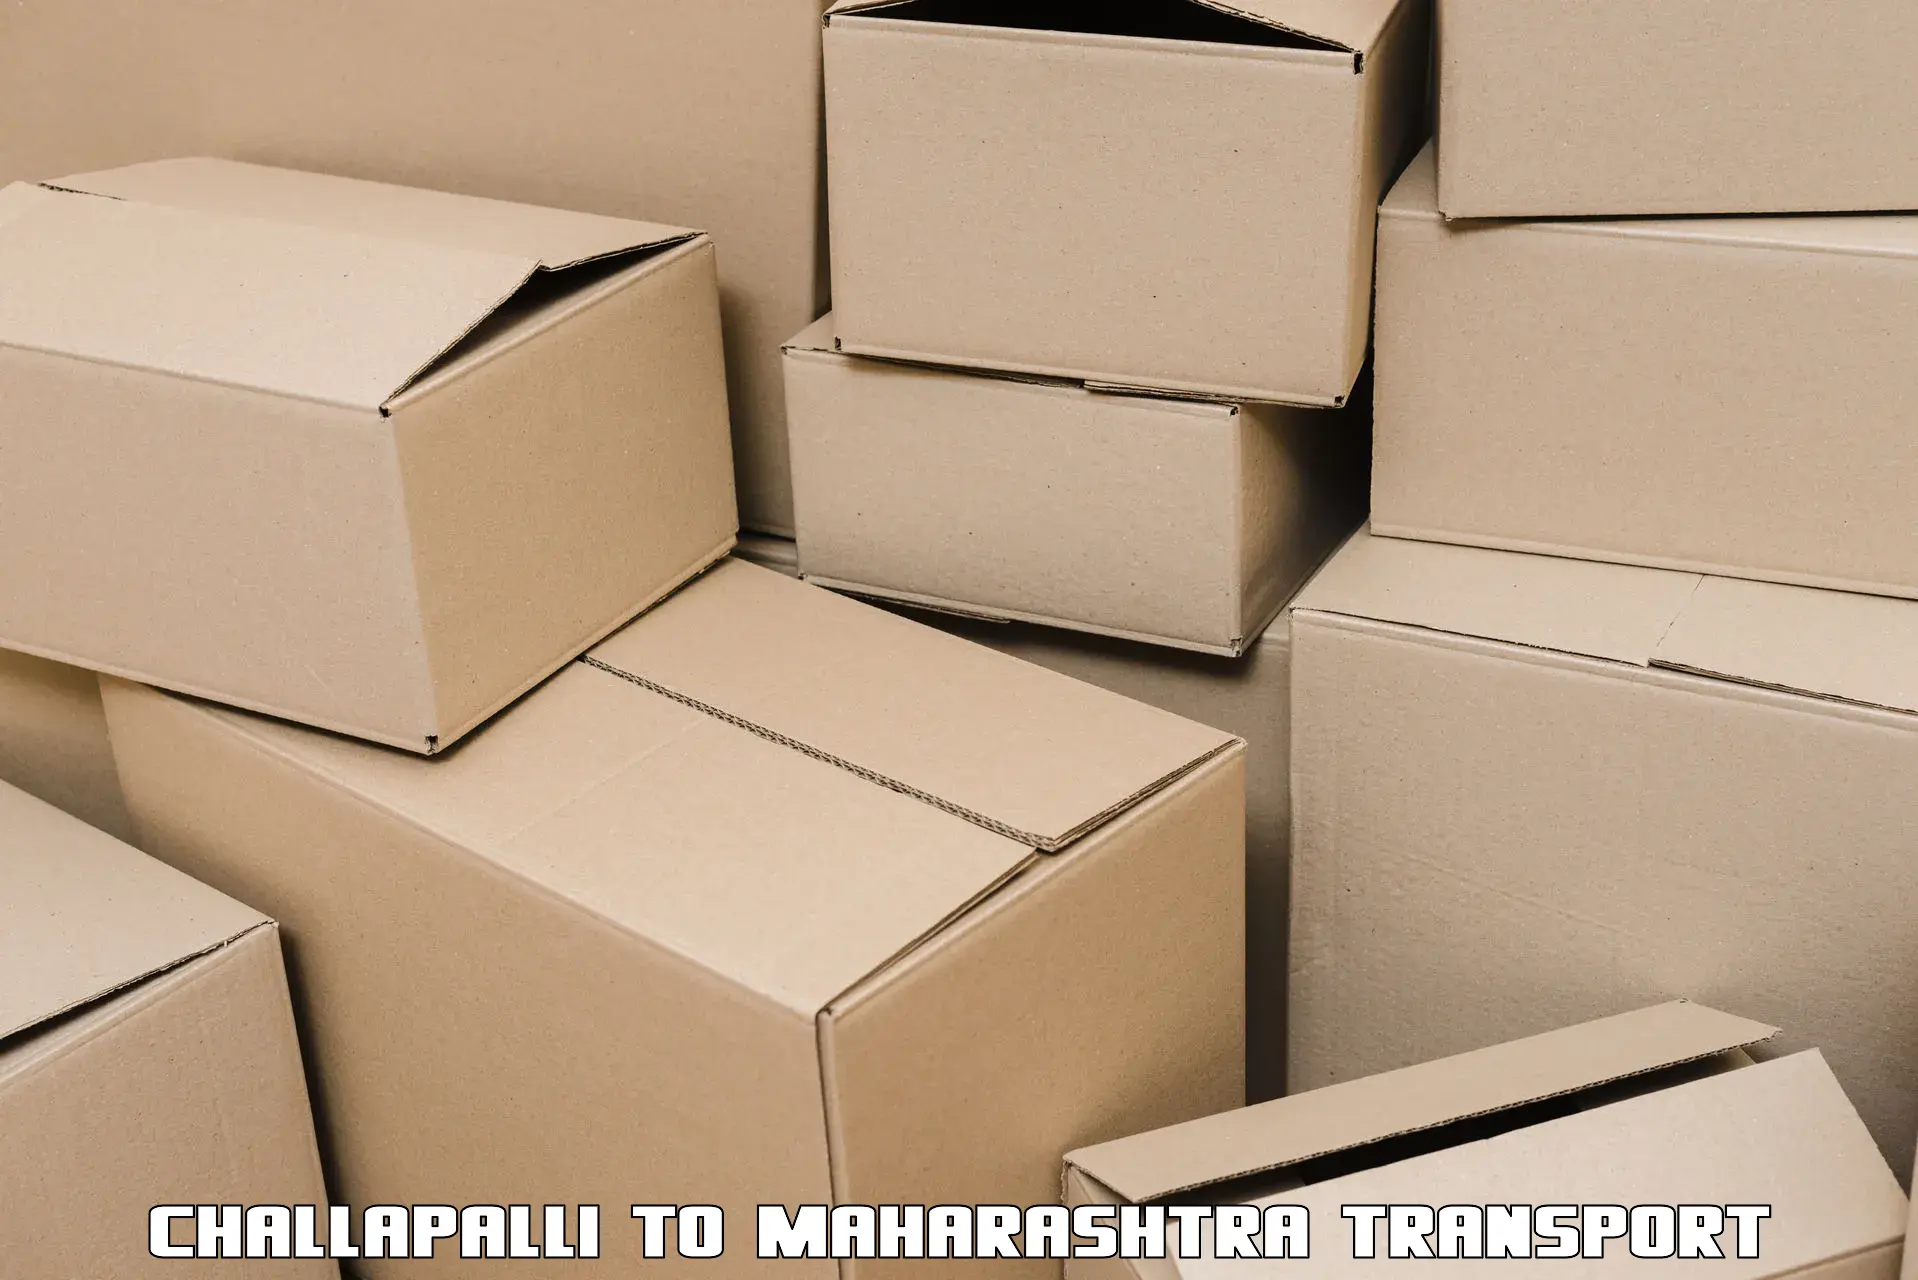 Truck transport companies in India Challapalli to Amdapur